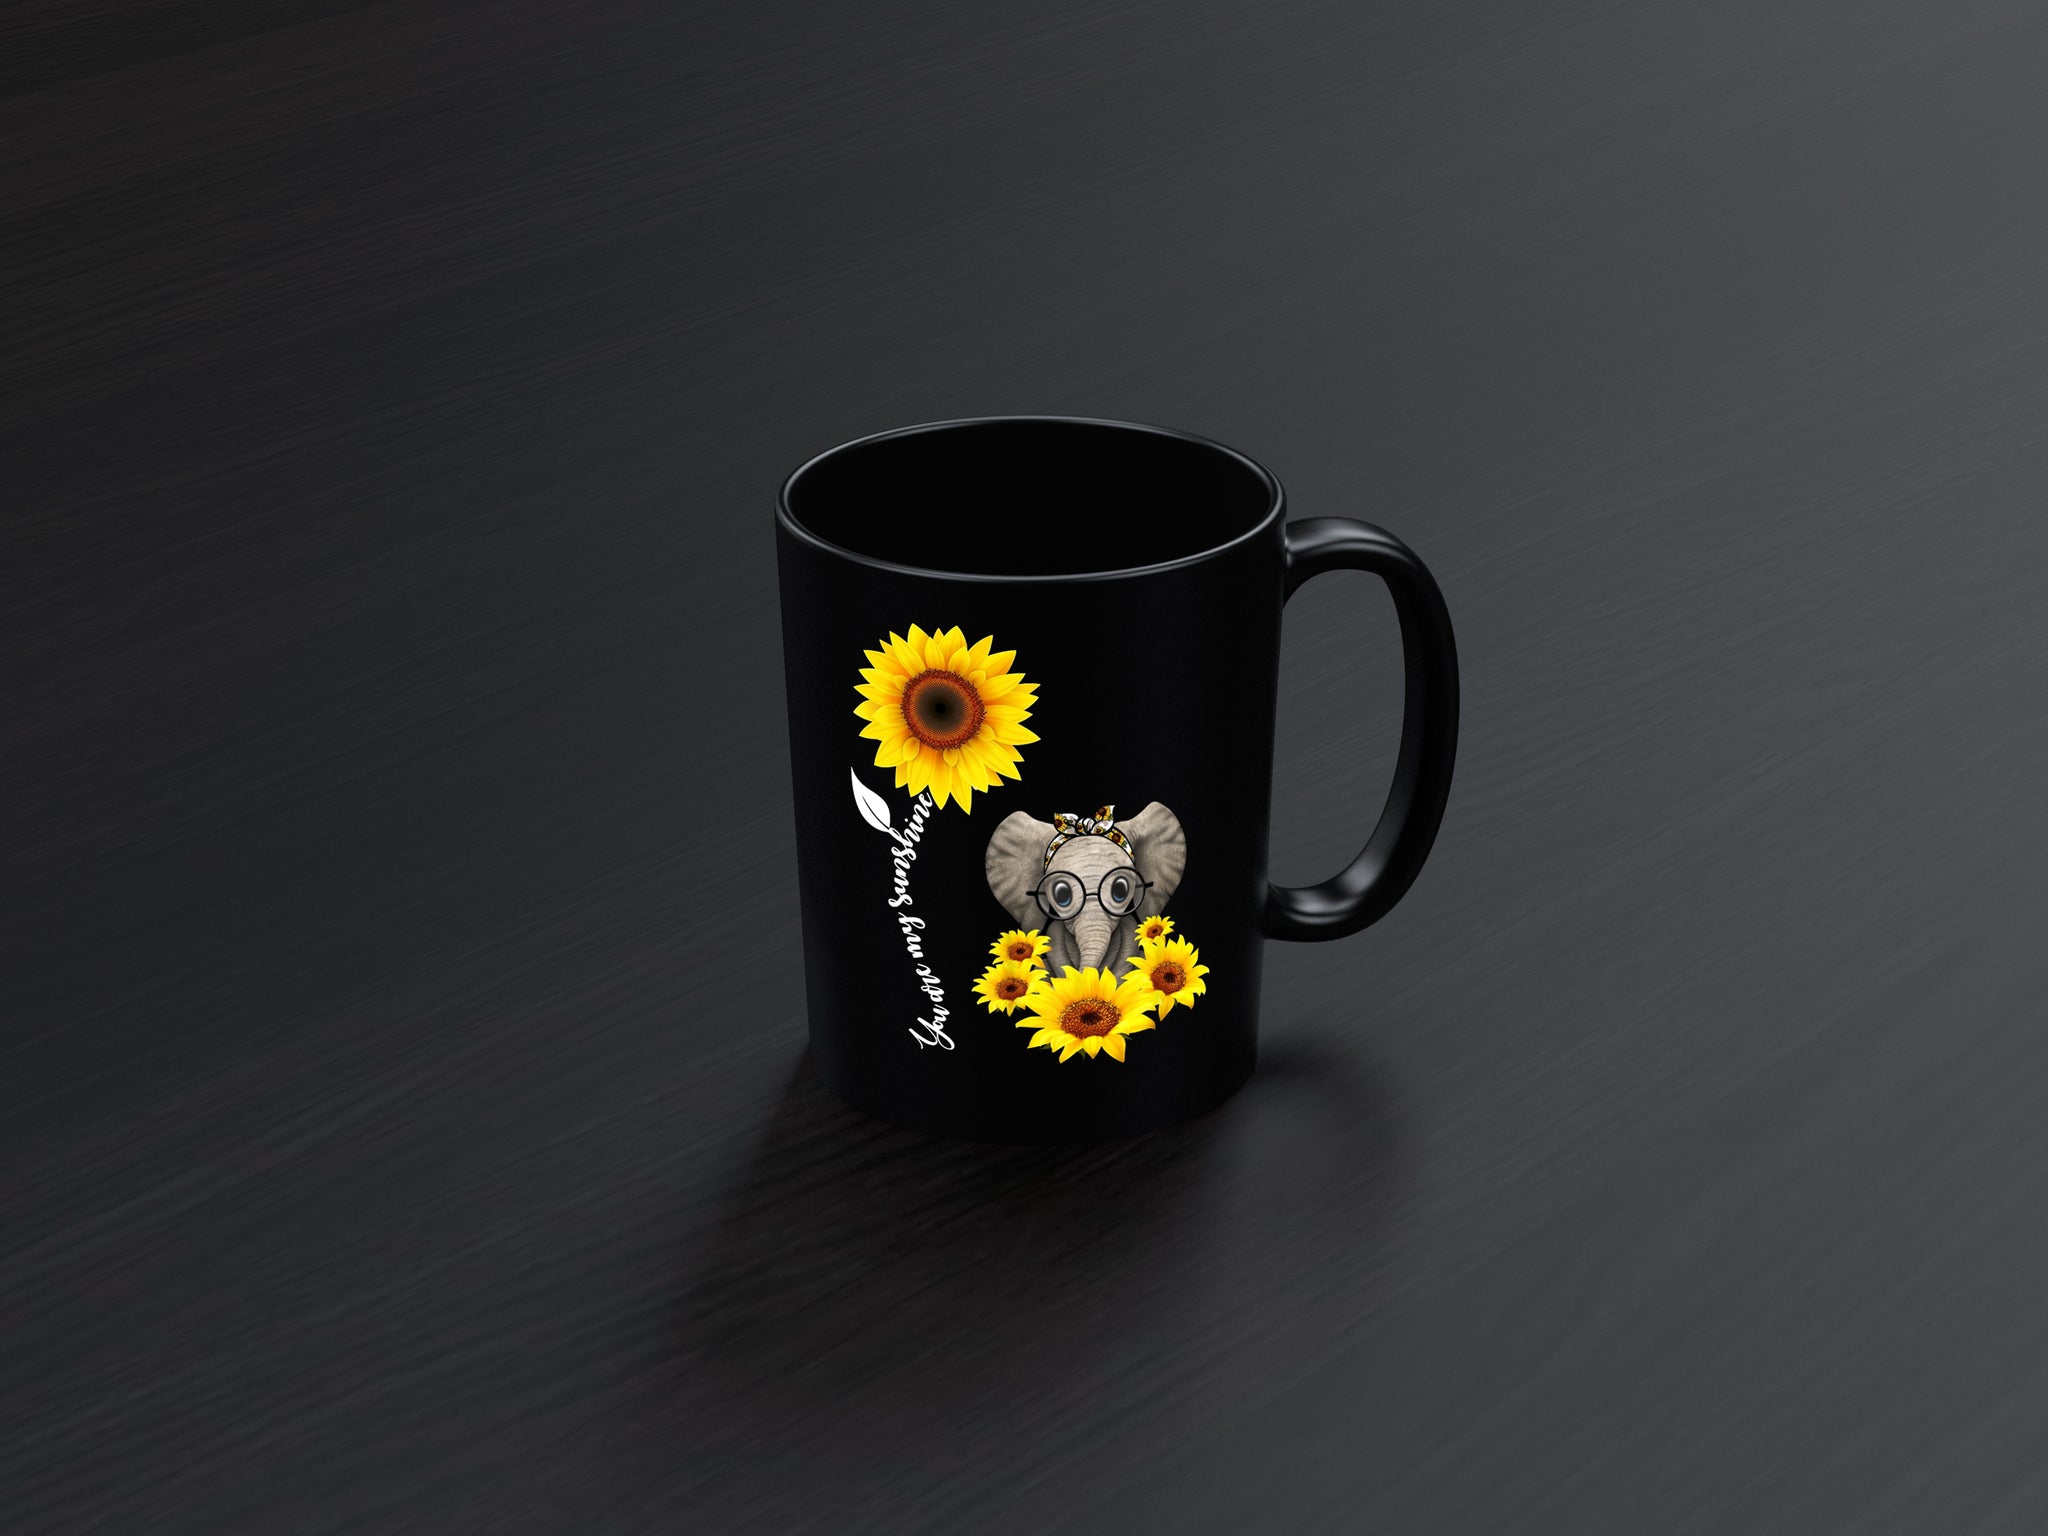 Skitongifts Funny Ceramic Coffee Mug For Birthday, Mother's Day, Father's Day, Christmas Sunflower Elephant